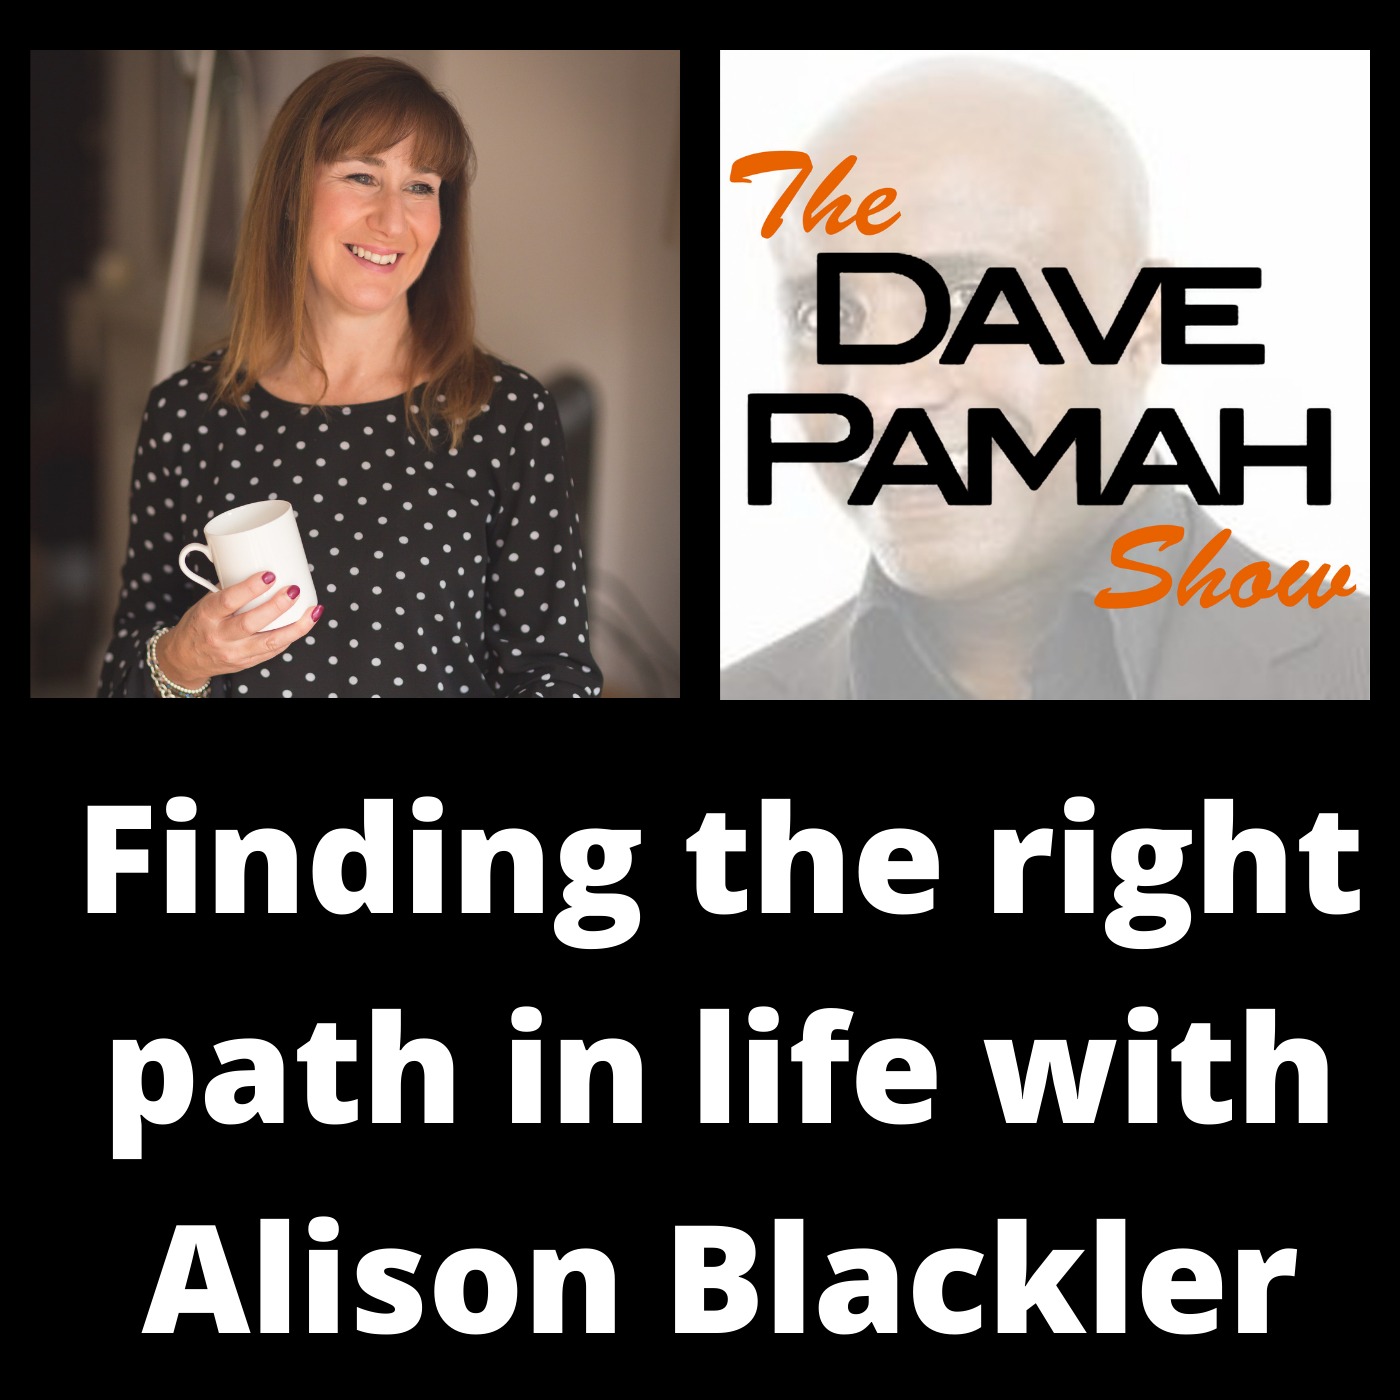 Finding the right path in life with Alison Blackler